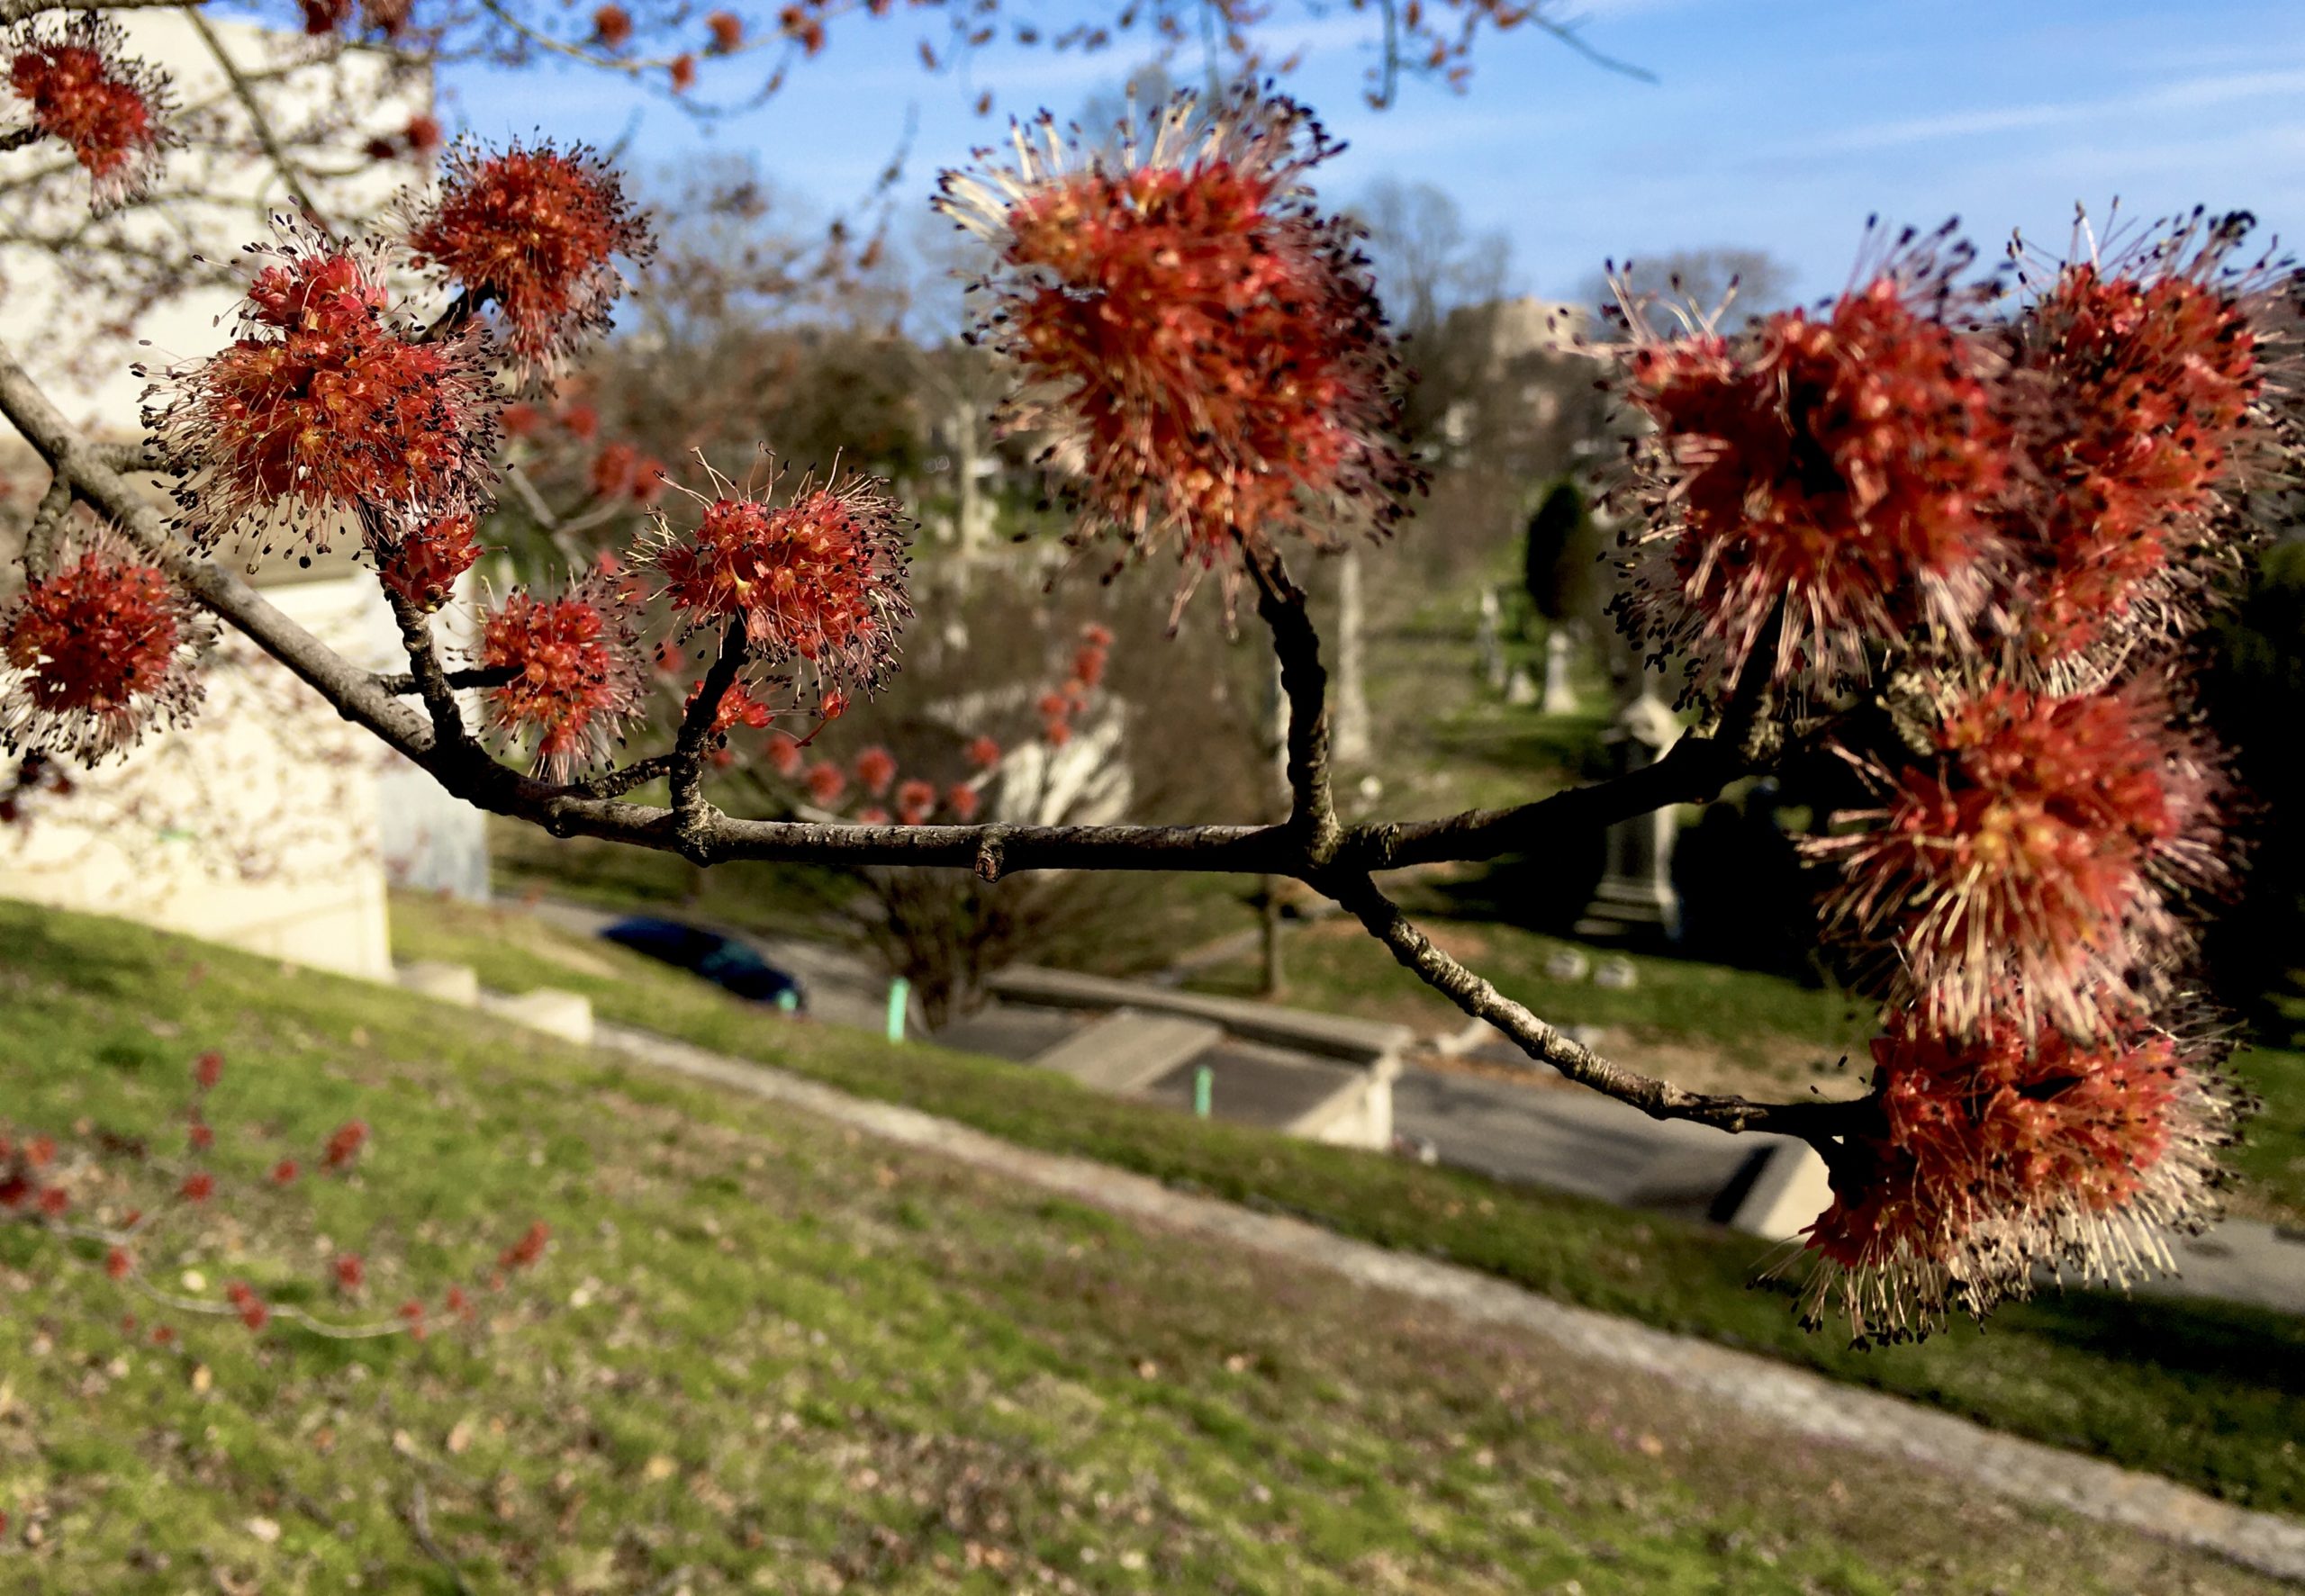 There are more than 7,000 trees at Green-Wood Cemetery. Photo: Lore Croghan/Brooklyn Eagle